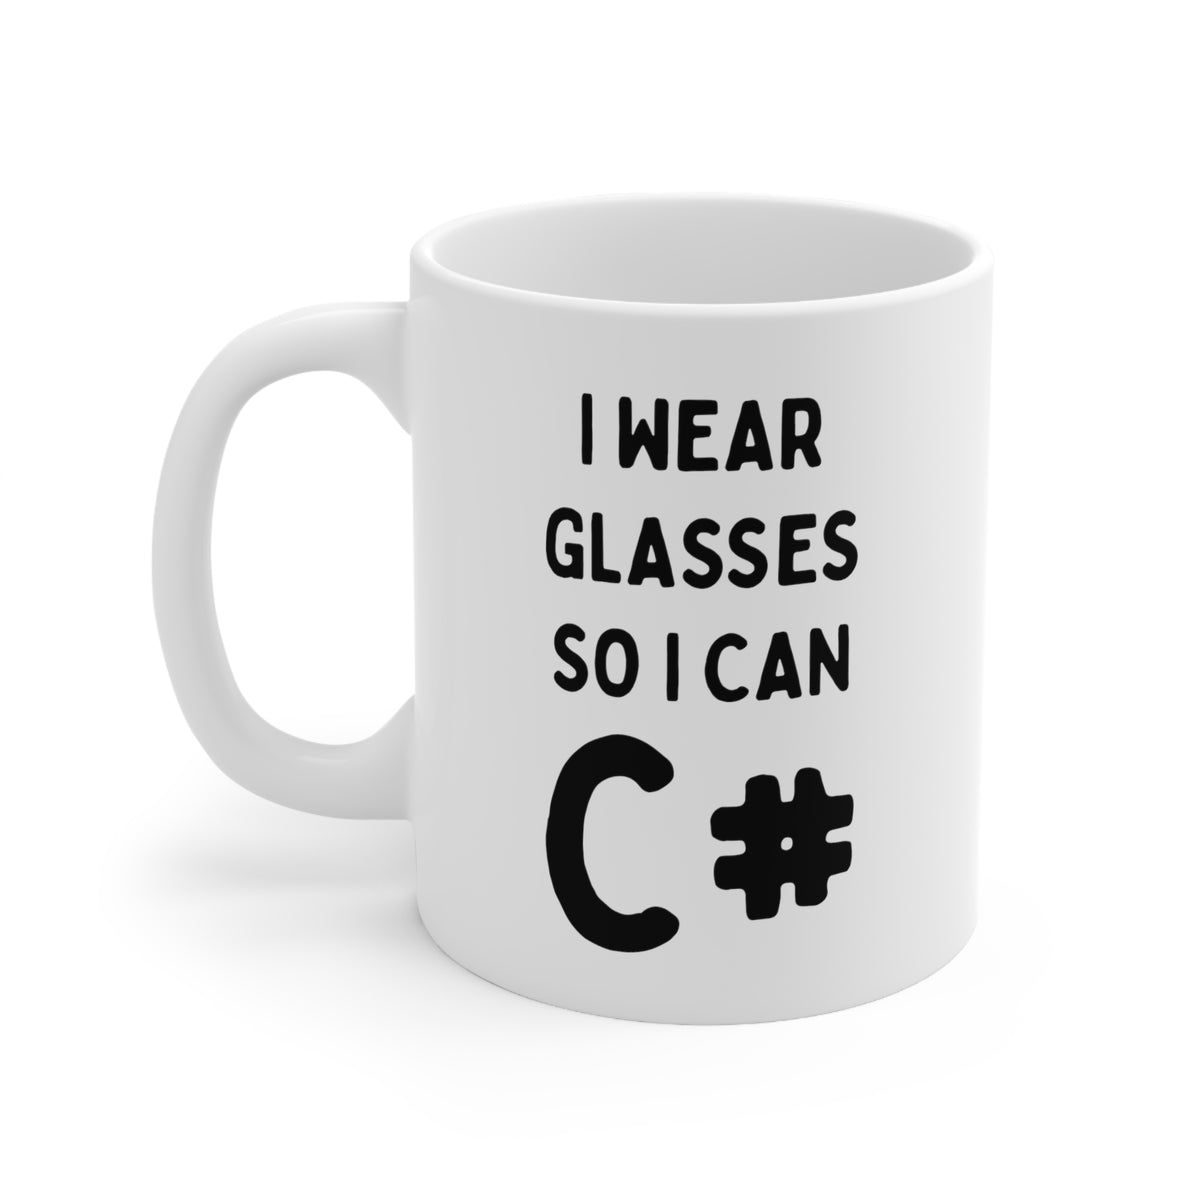 Coding Coffee Mug - I wear glasses so I can C# Cup - Fun Gifts for PHP JavaScript Developer Men Women